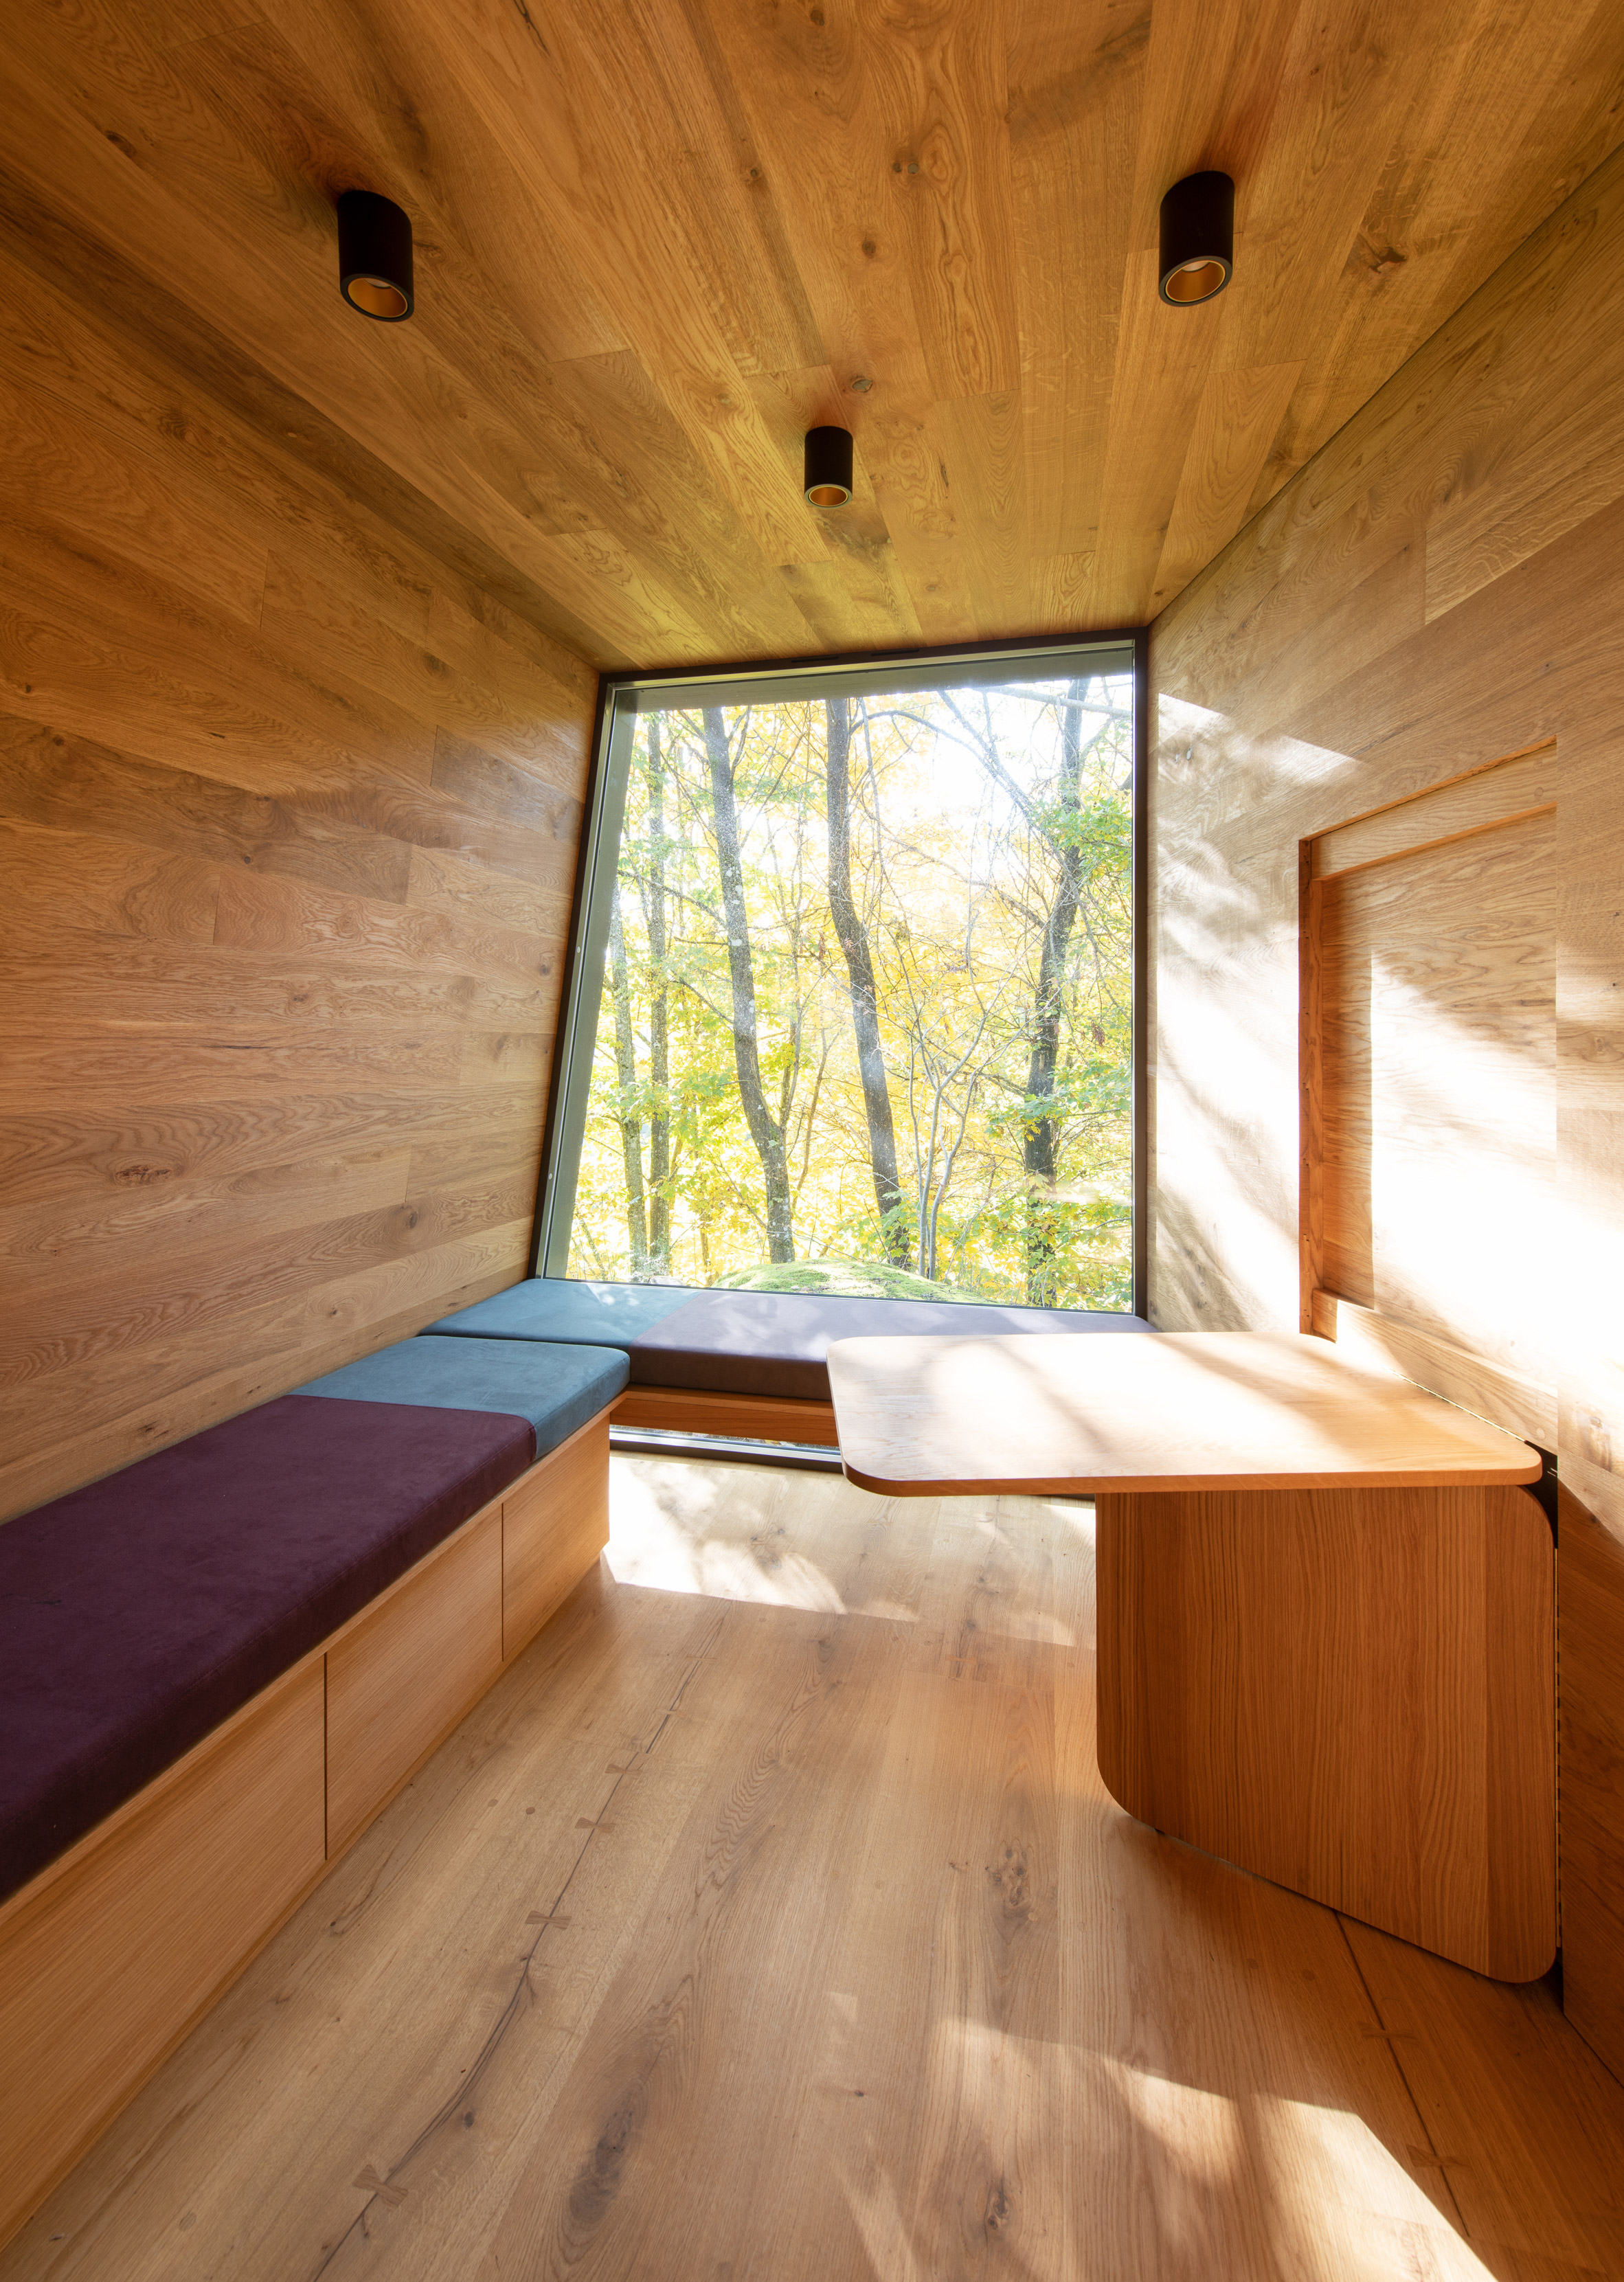 Interiors of Outdoor Care Retreats by Snøhetta in Norway